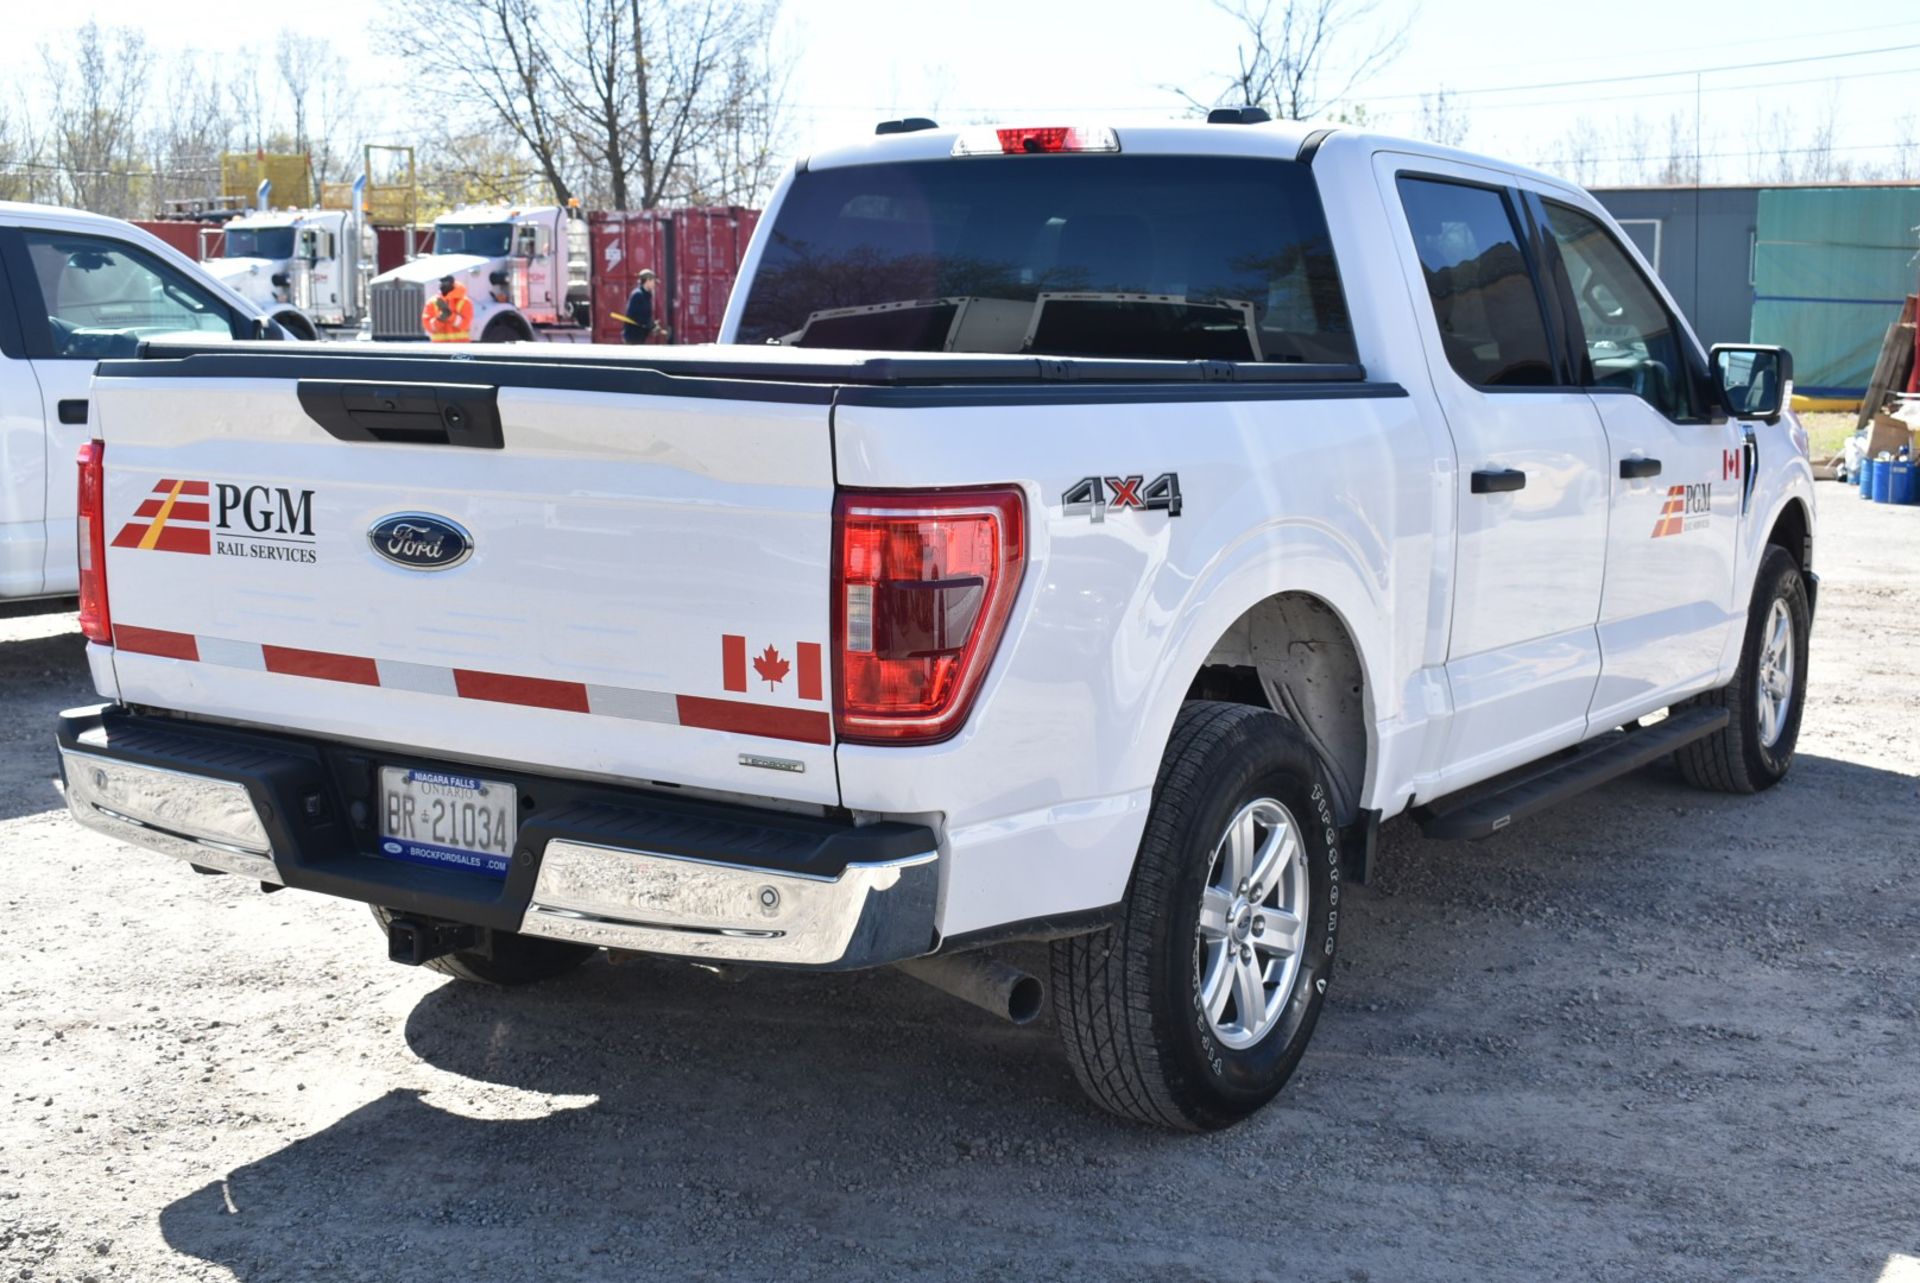 FORD (2021) F150 XLT CREW CAB PICKUP TRUCK WITH 3.5L 6 CYL. GAS ENGINE, AUTO. TRANSMISSION, 4X4, - Image 4 of 15